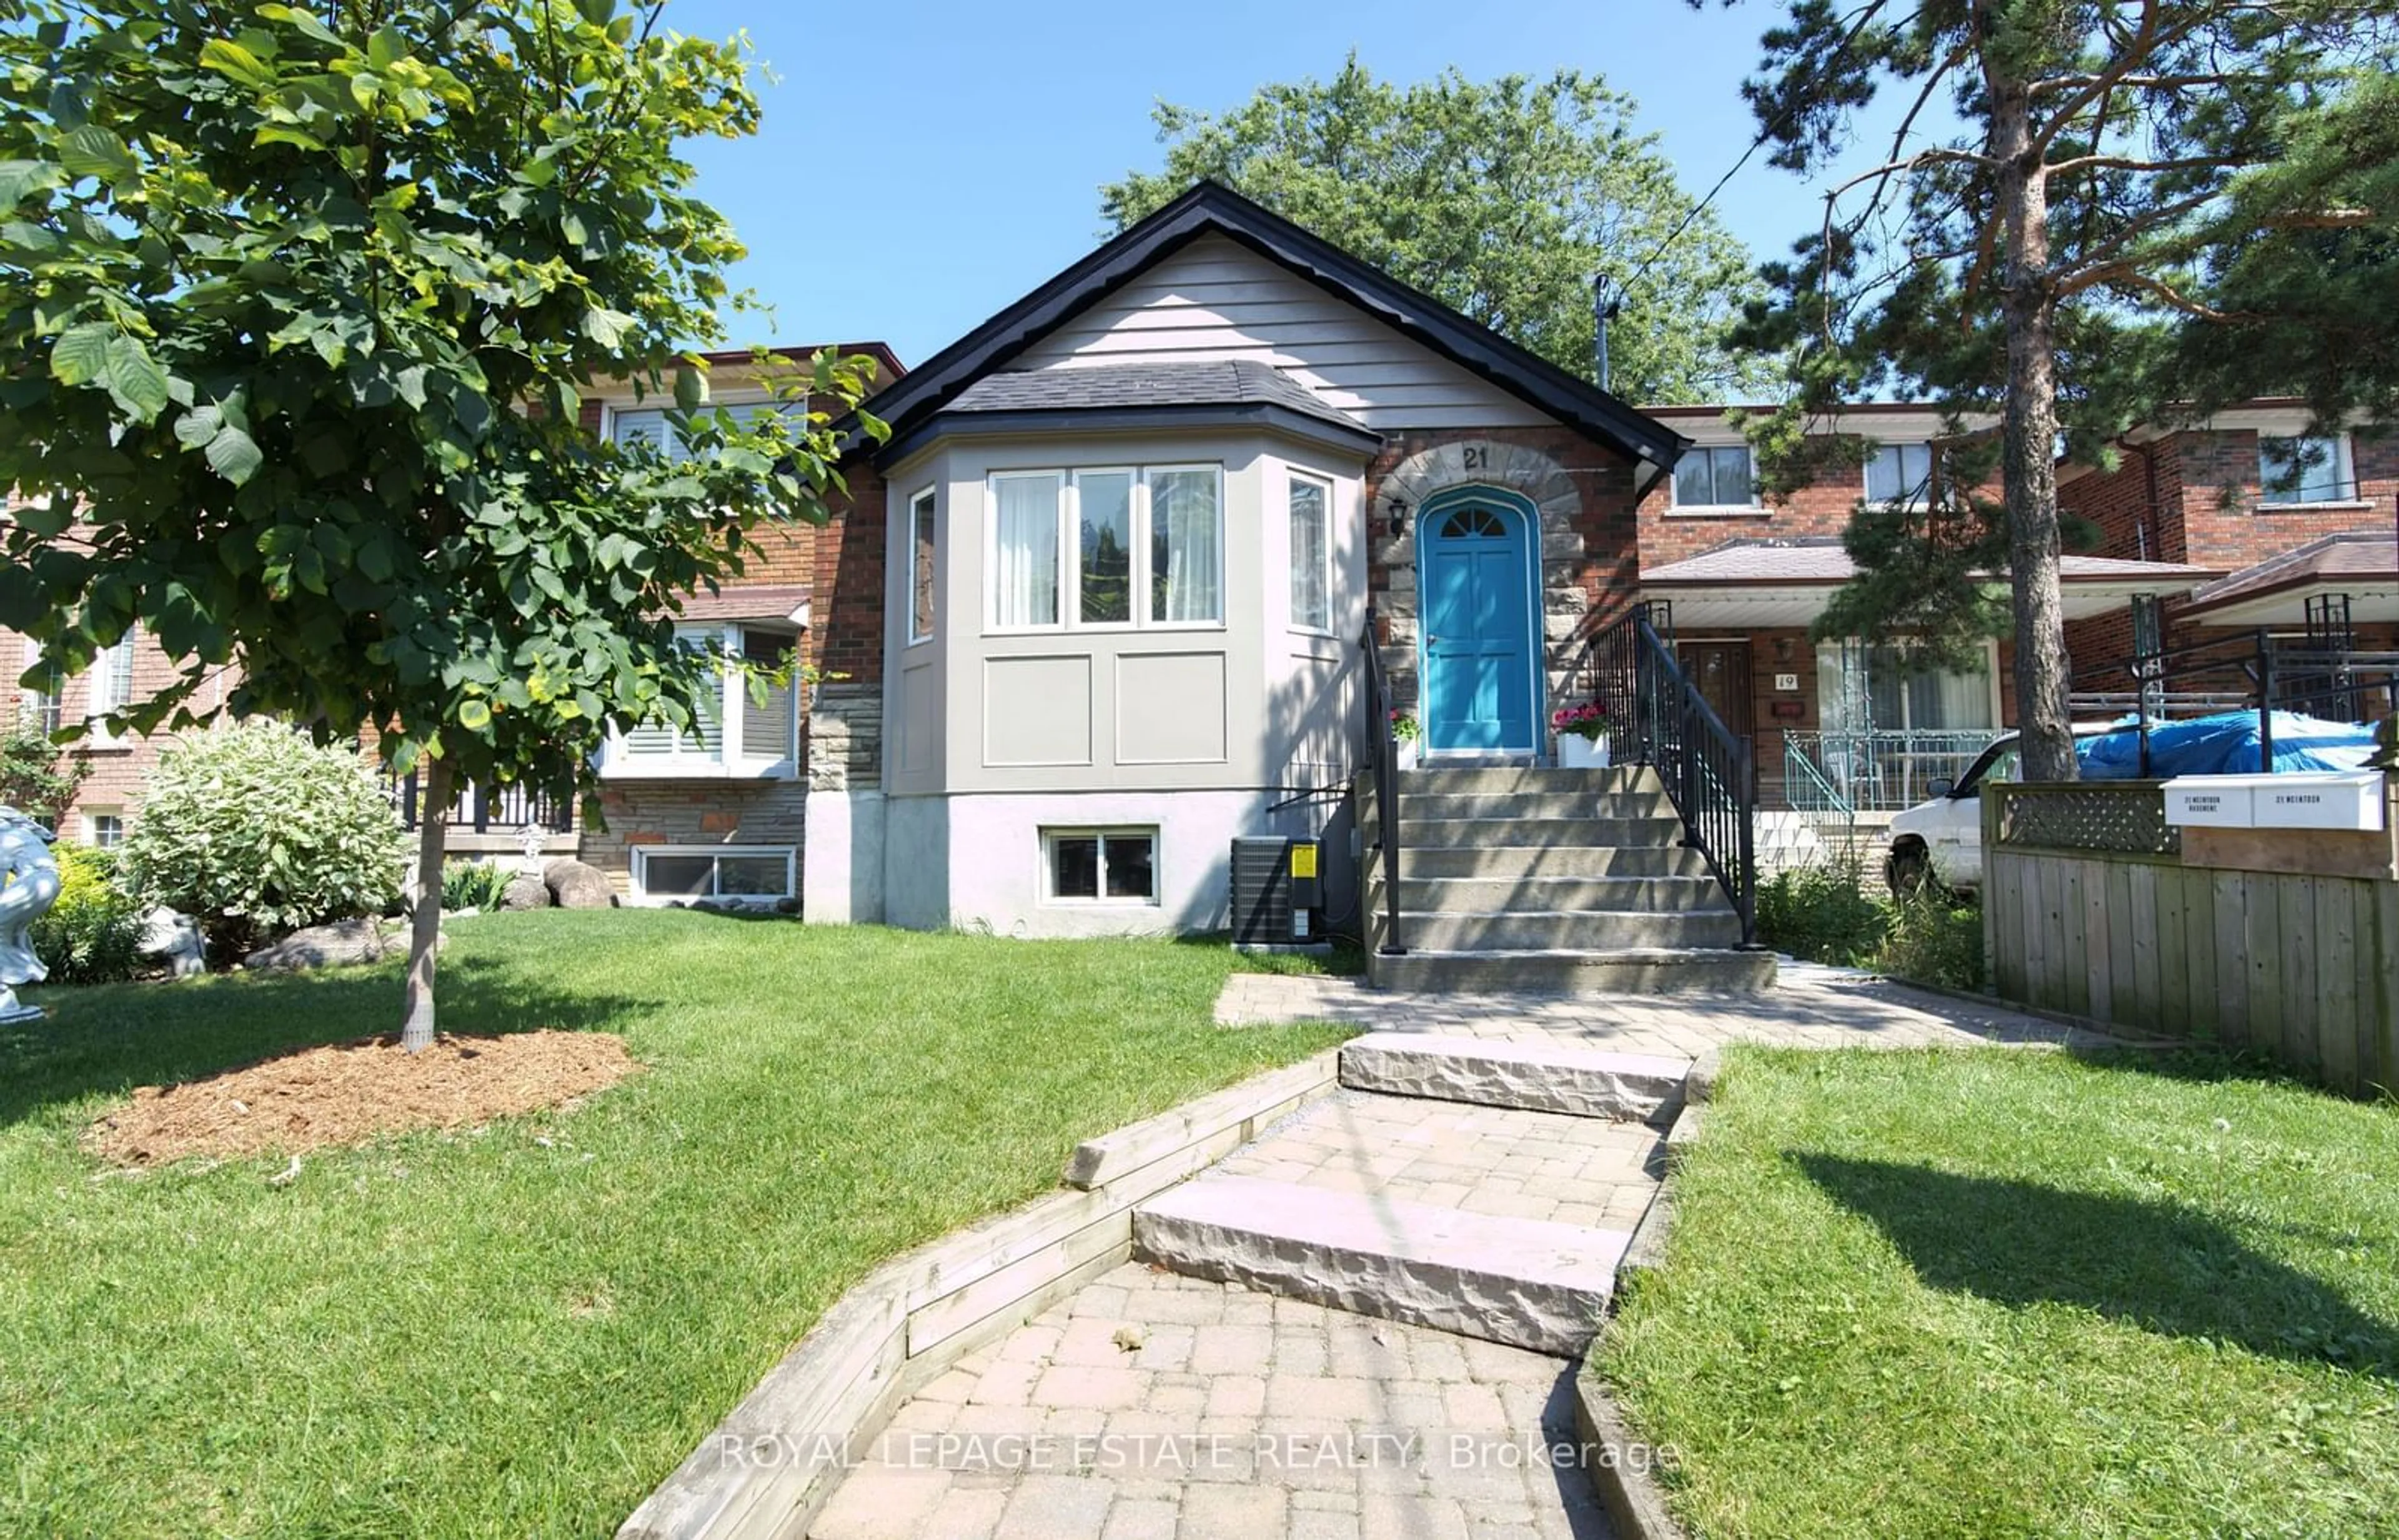 Frontside or backside of a home for 21 Mcintosh St, Toronto Ontario M1N 3Z2